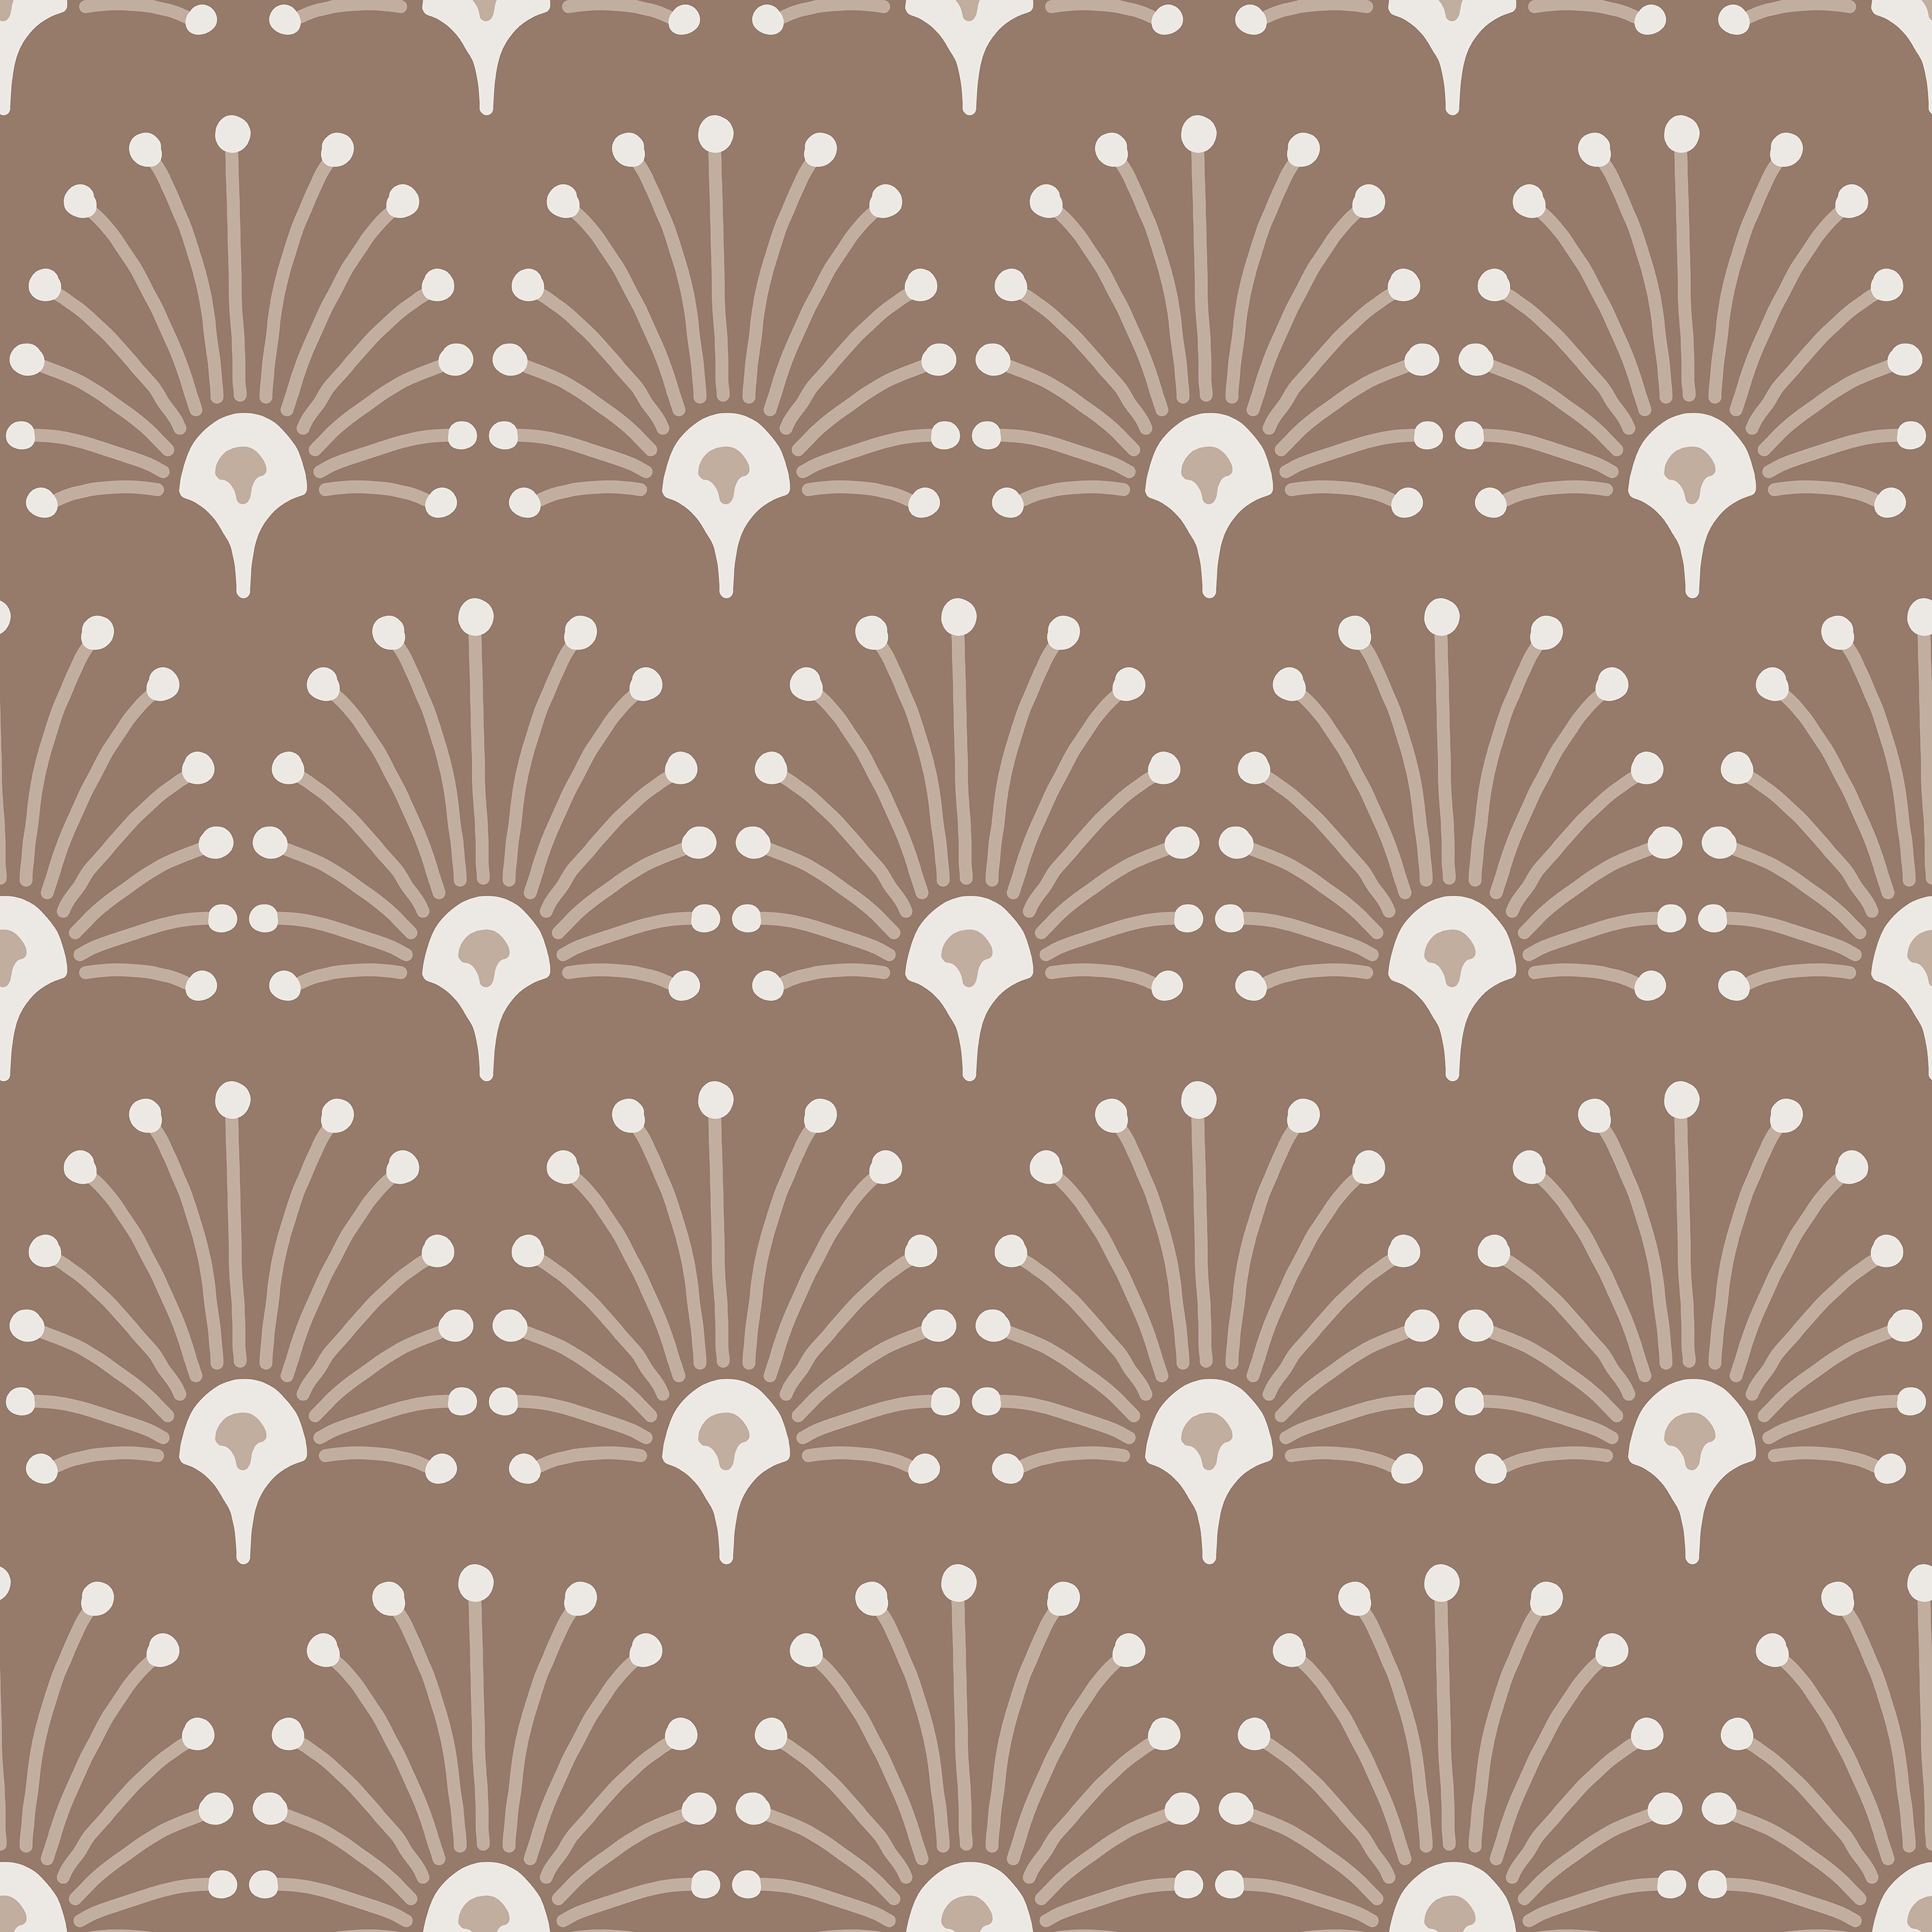 Taupe Peacock Fans Self Adhesive Vinyl